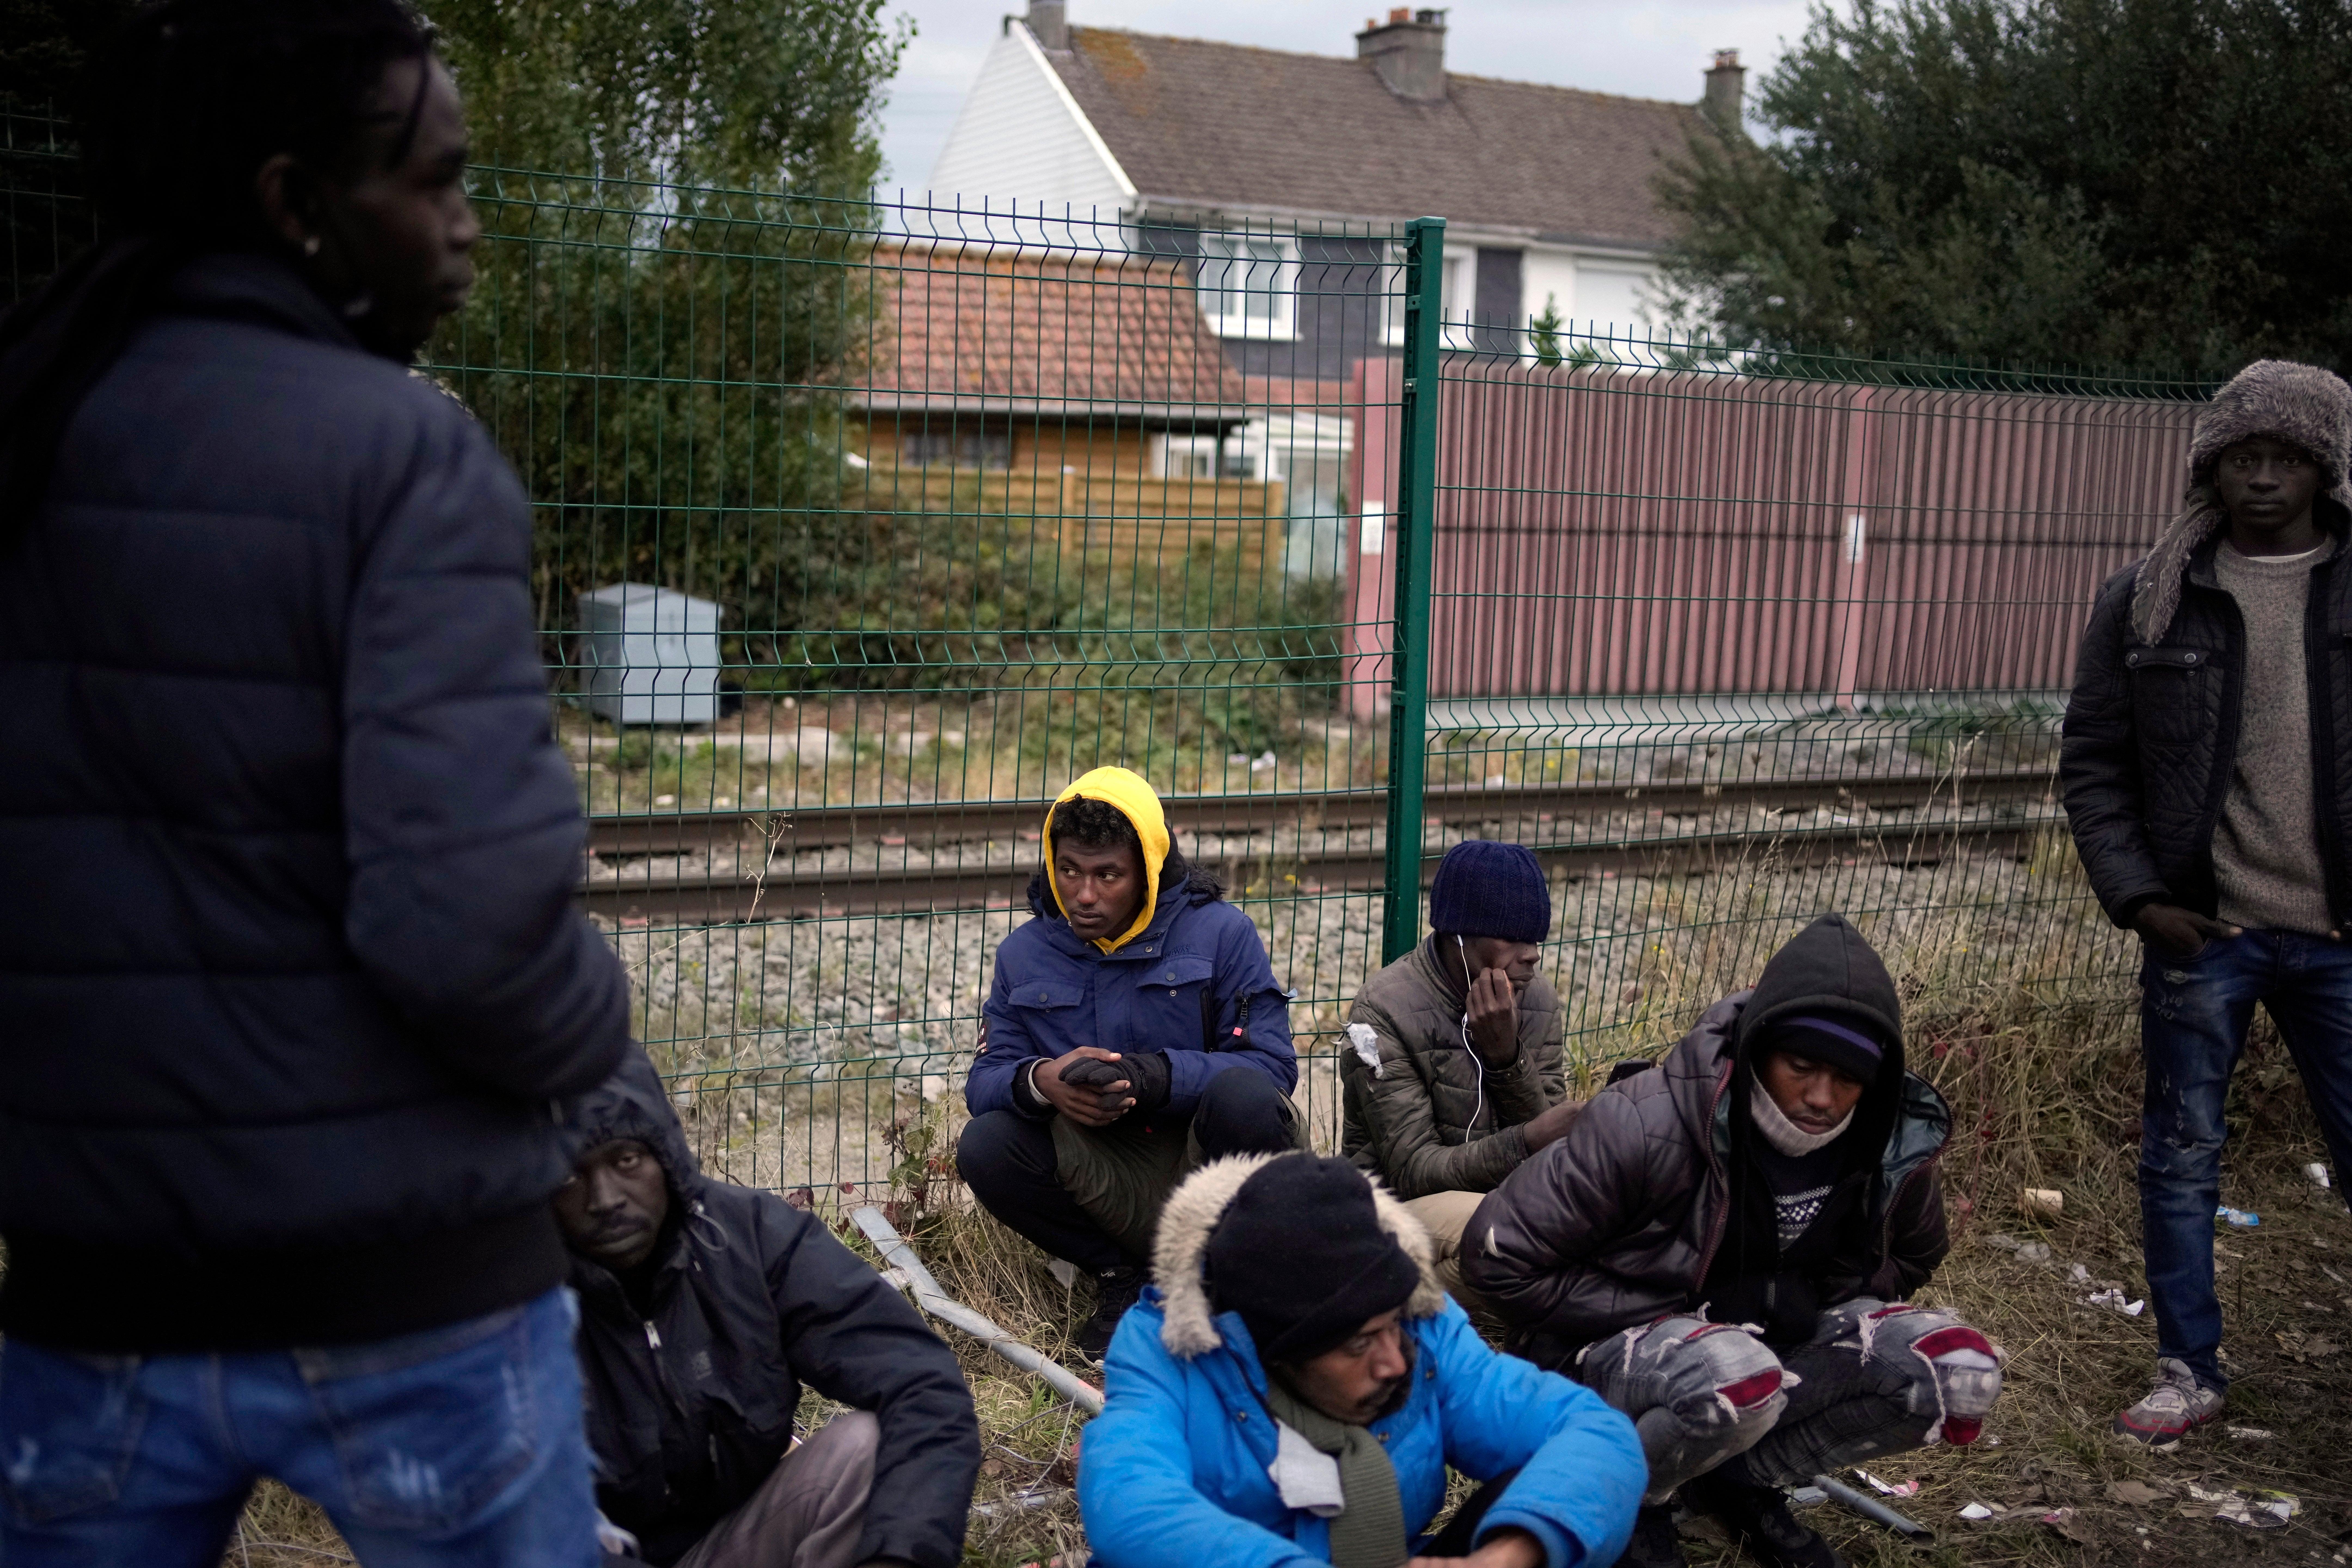 Migrants and refugees wait for food distribution at a camp in Calais